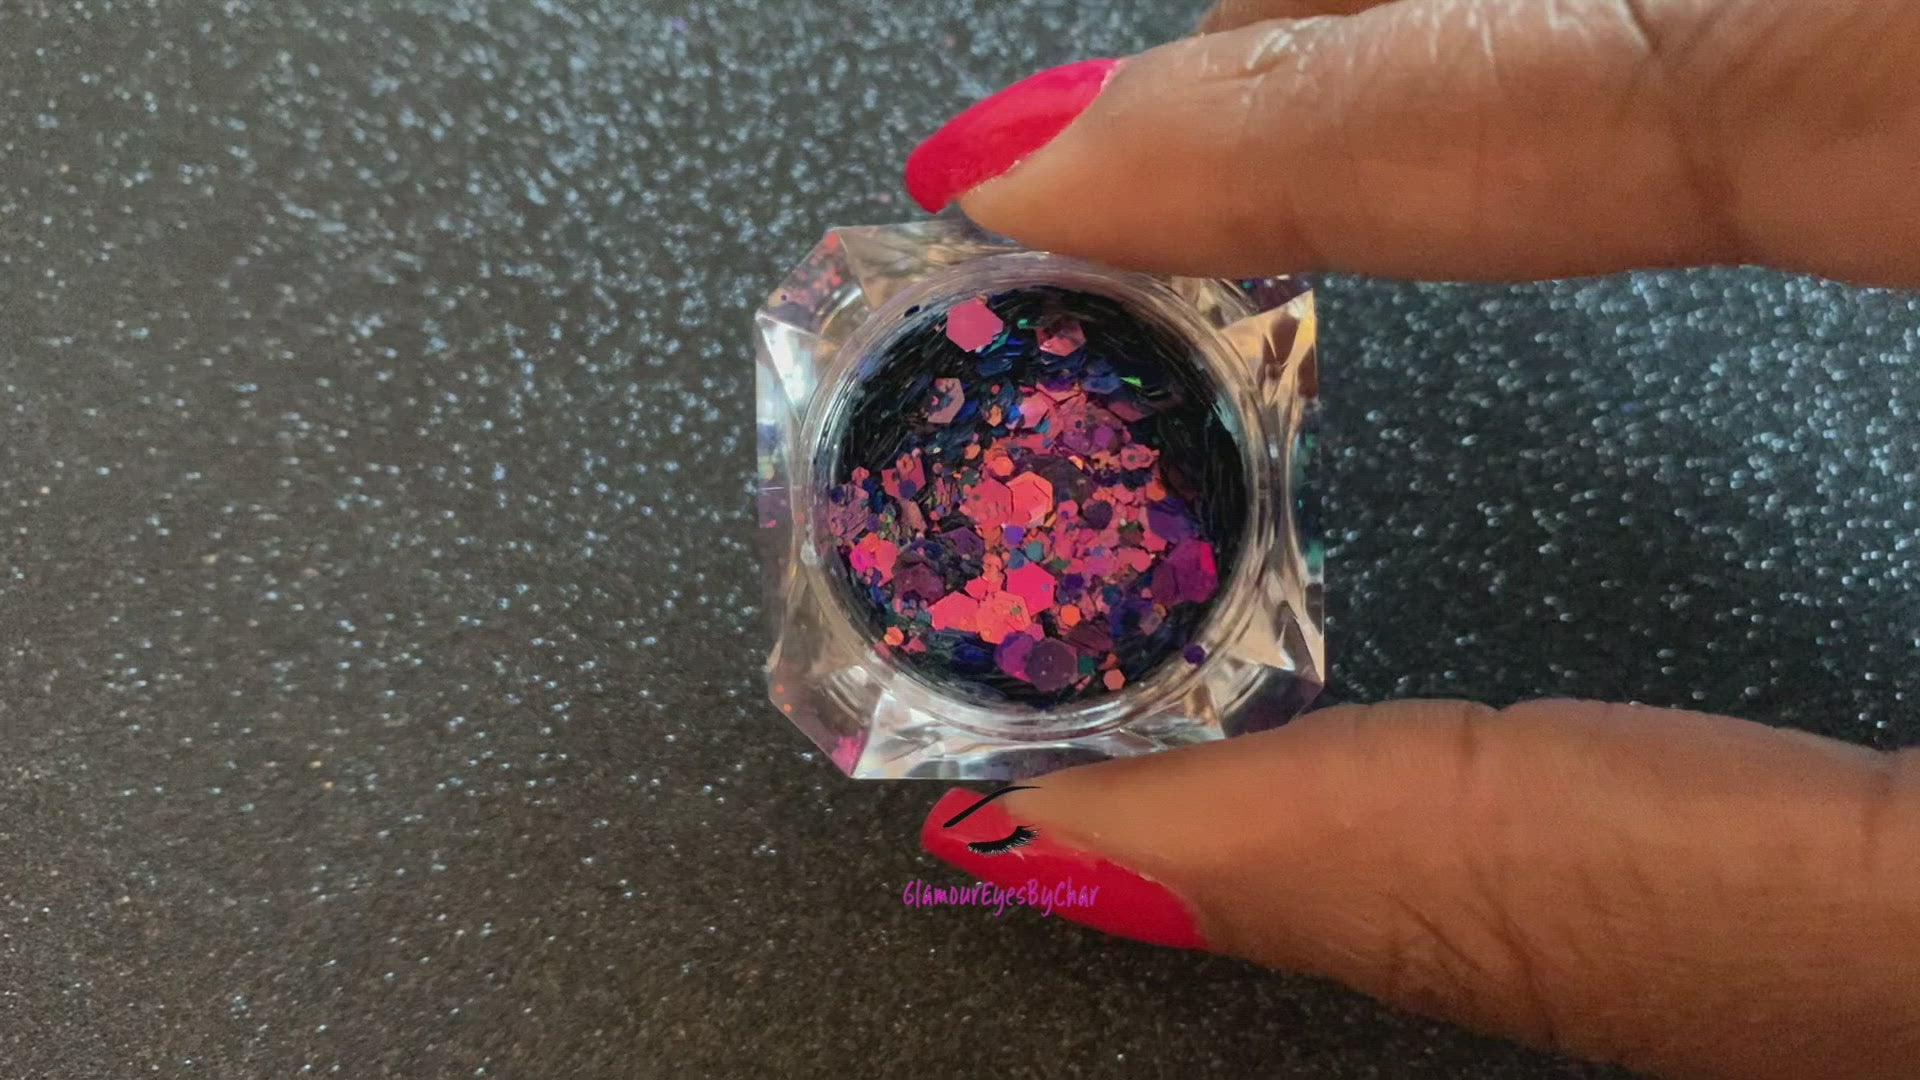 This chameleon glitter is called Hypnotic and is part of the super chunky glitter collection. It consists of dark pink glitter with a purple and teal unique colour shifting sparkle. Hypnotic can be used for your face, body, hair and nails.  Comes in 5g jars only.